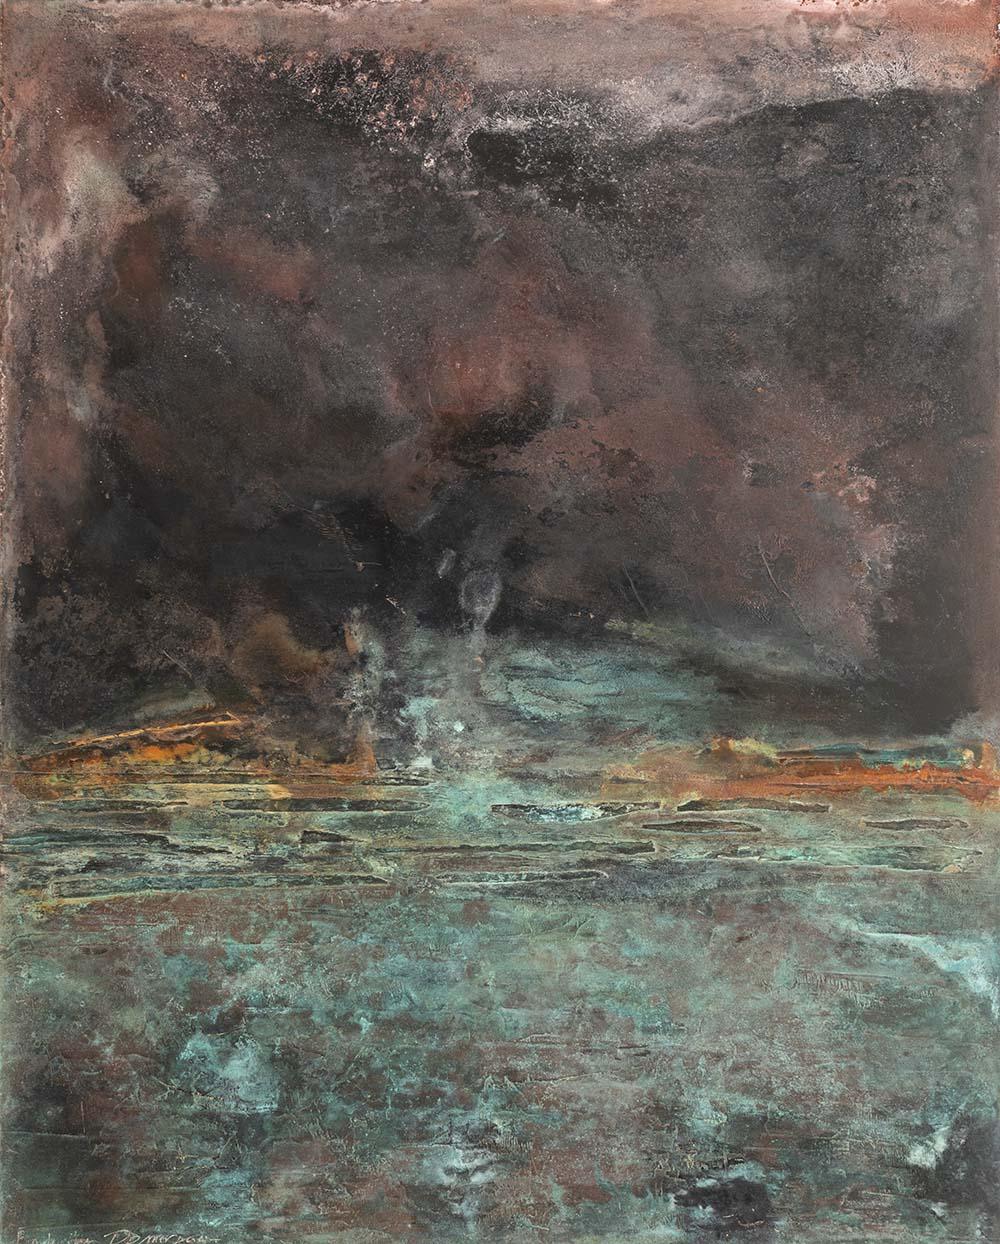 Surfacing by Frédérique Domergue - Abstract painting, metal leaves, sea, sky